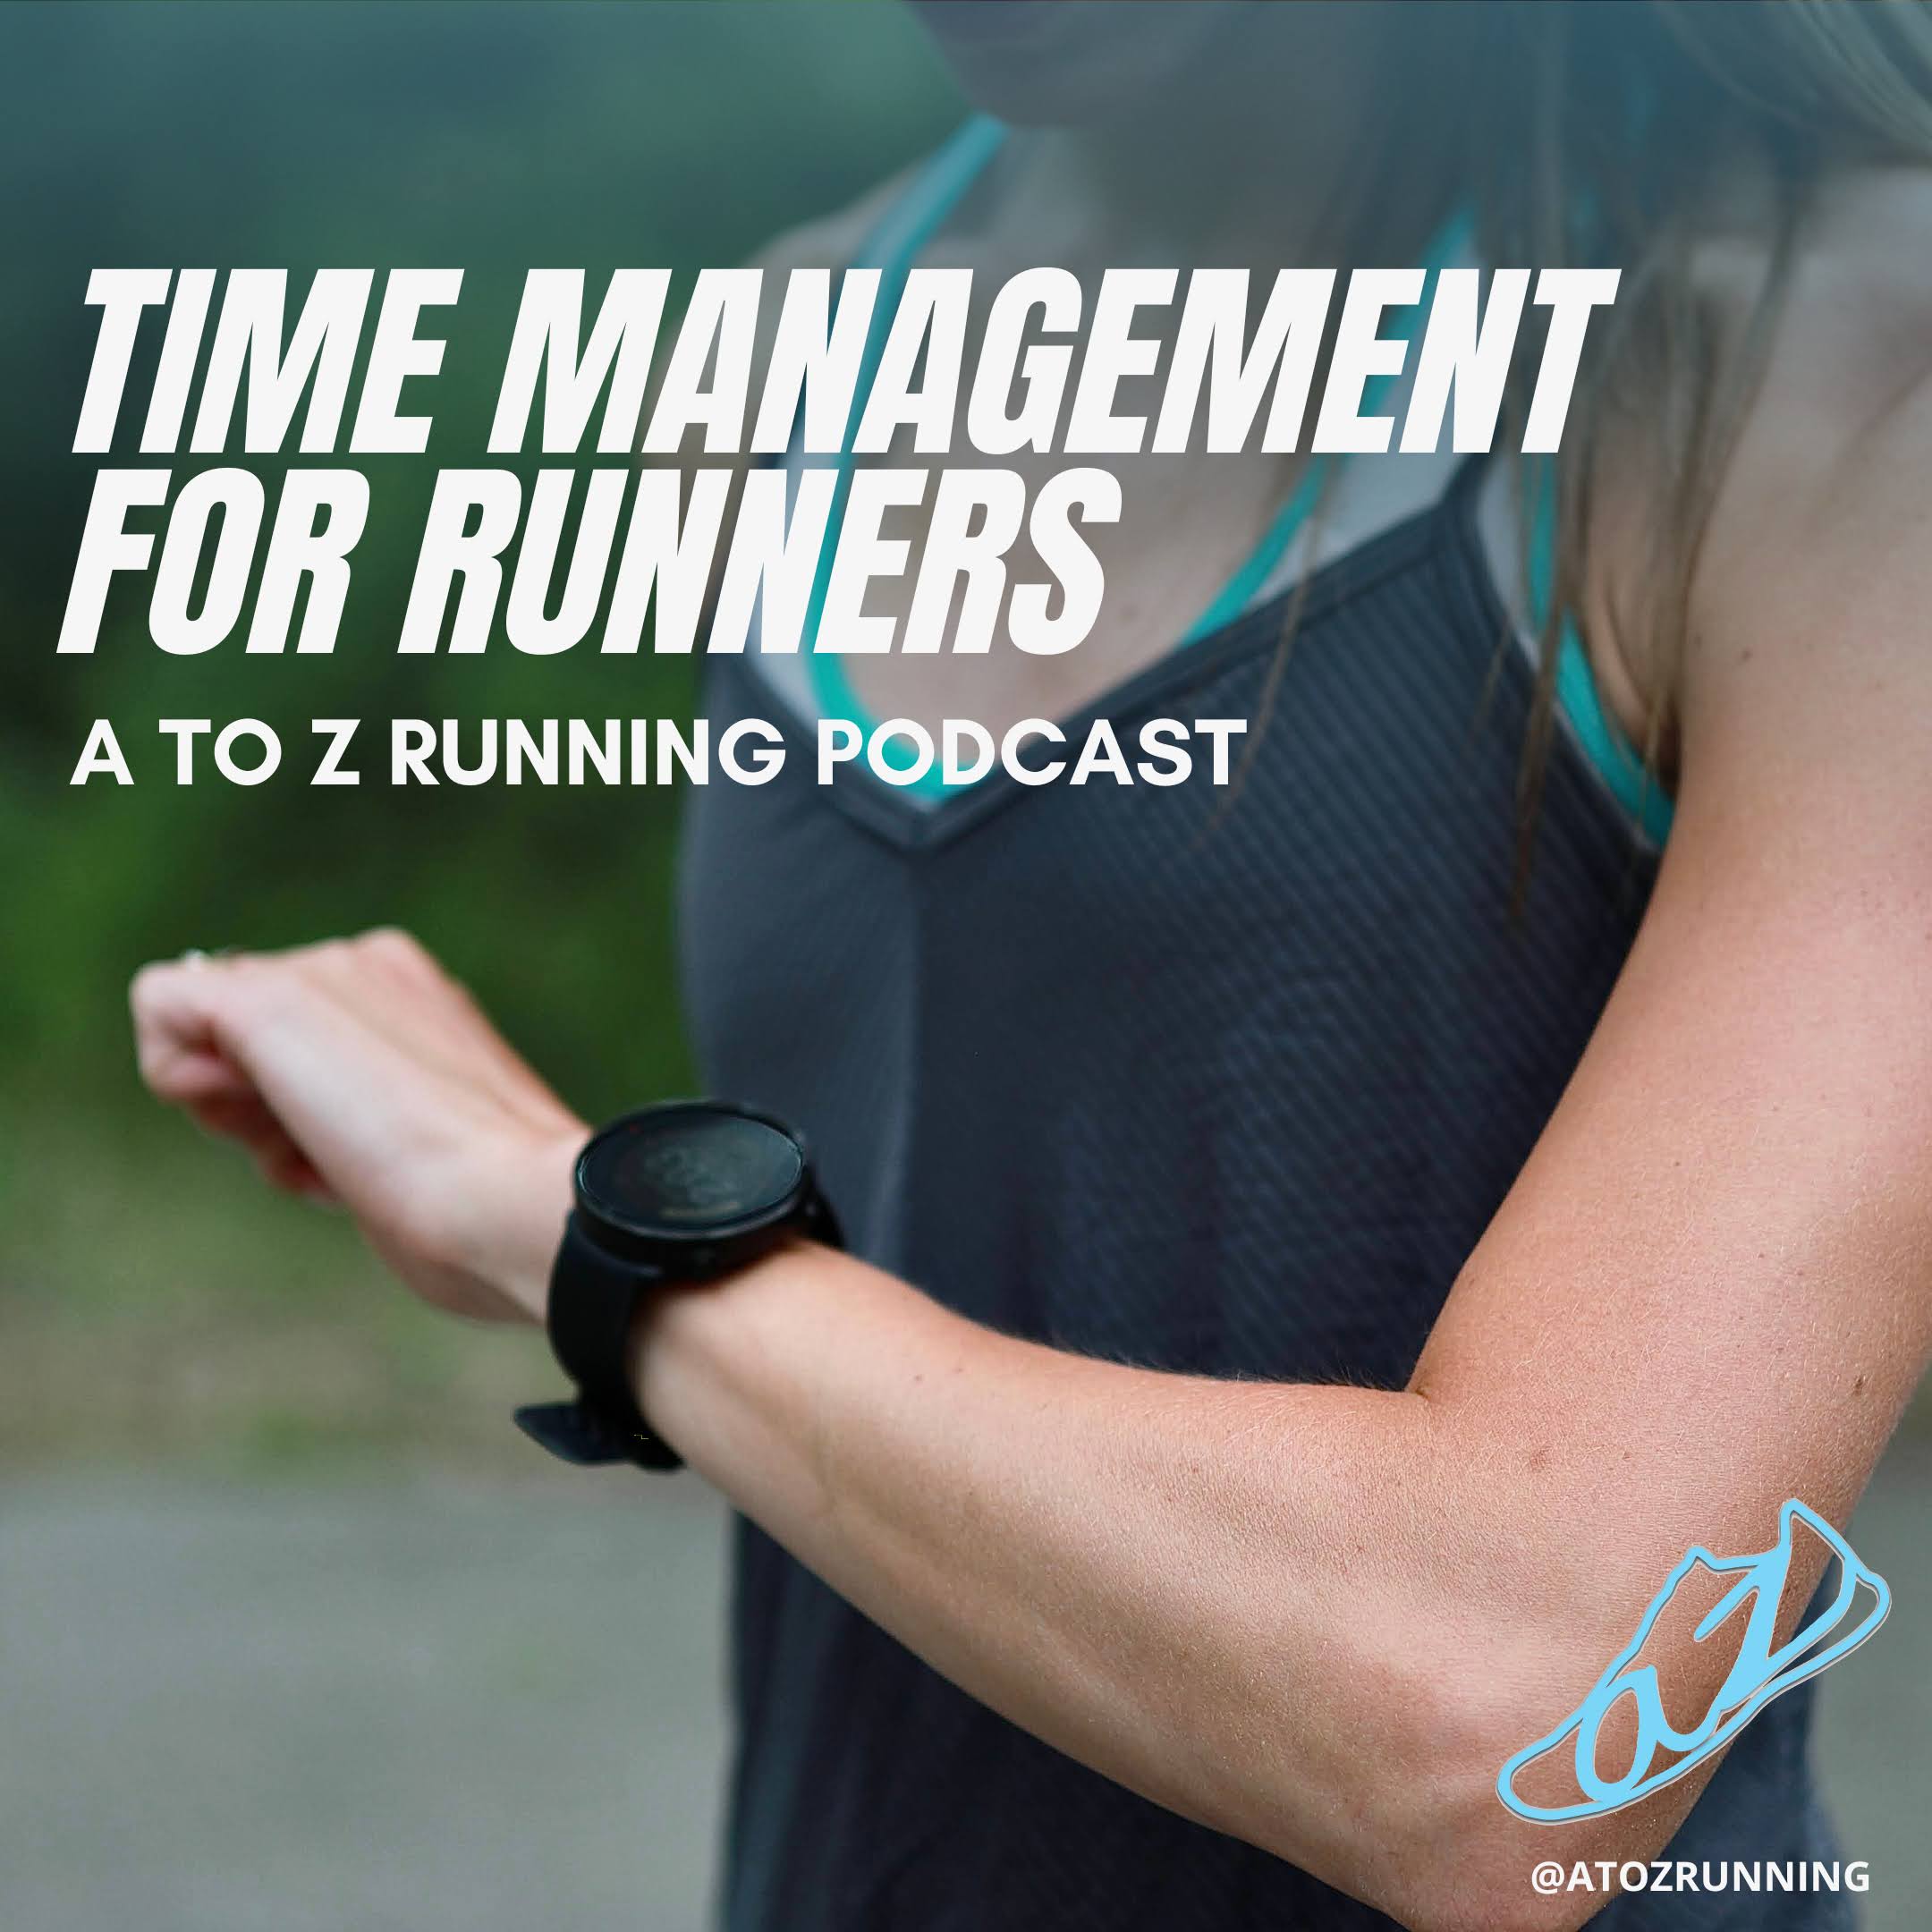 Time management for runners